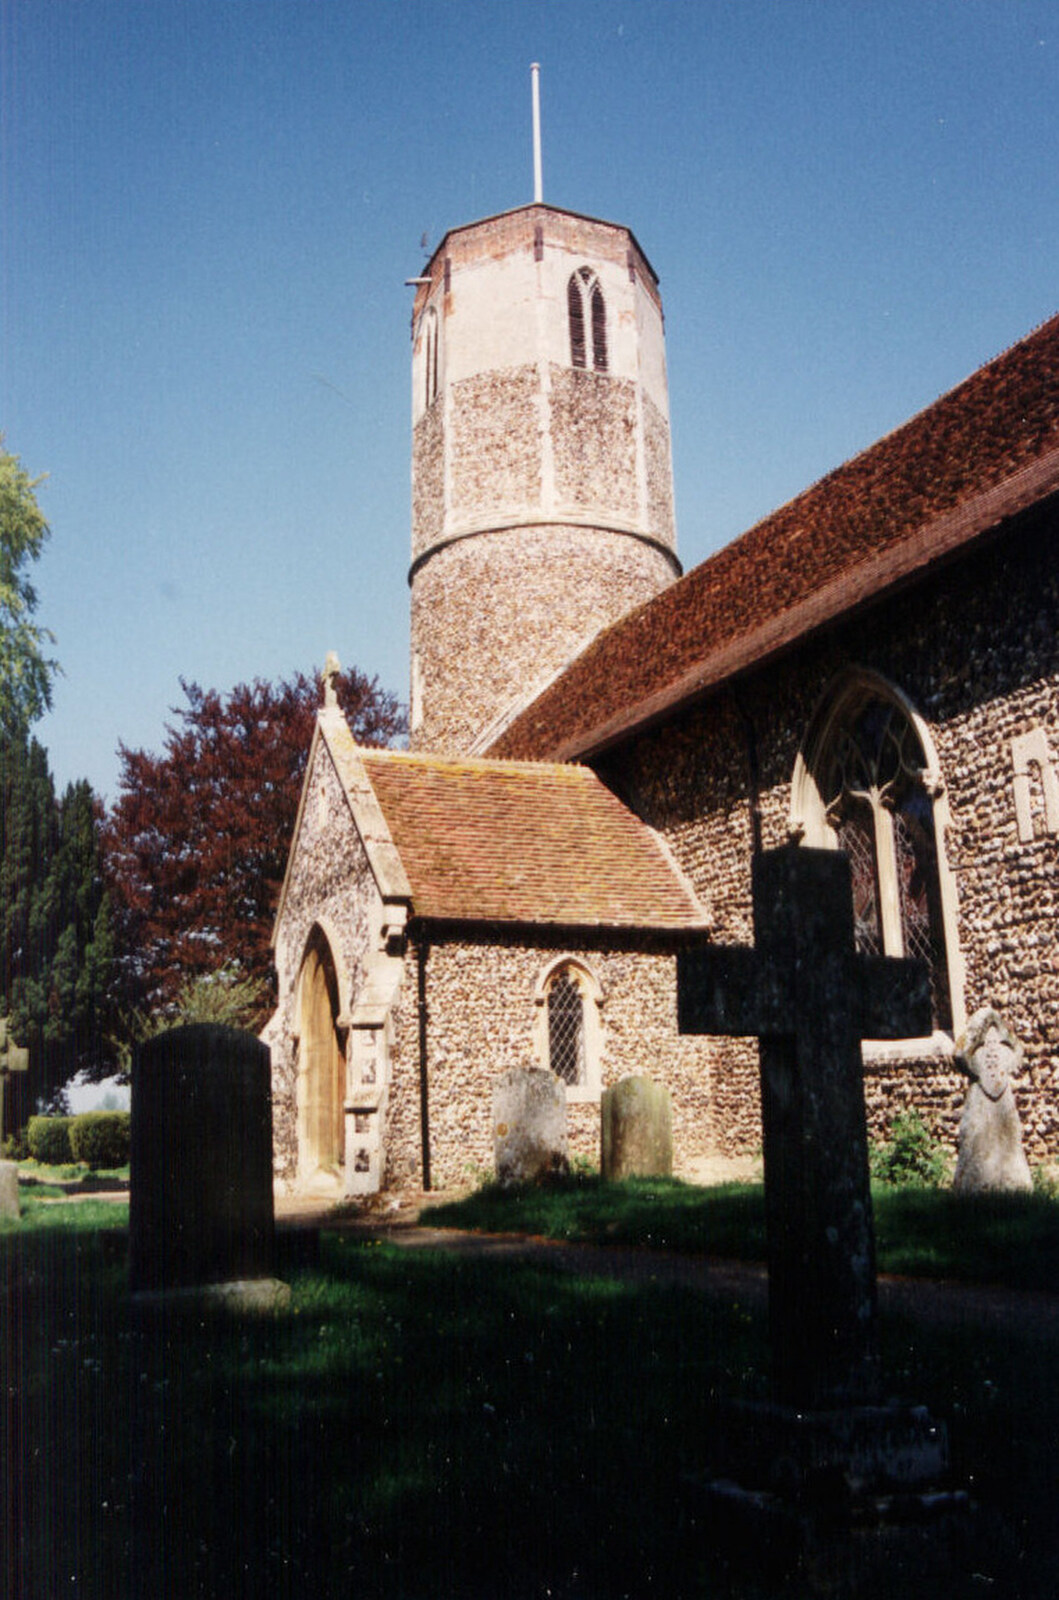 An octagonal church somewhere from Tapestry With Baz, and a Trip to Blakeney, Suffolk and Norfolk - 14th May 1990